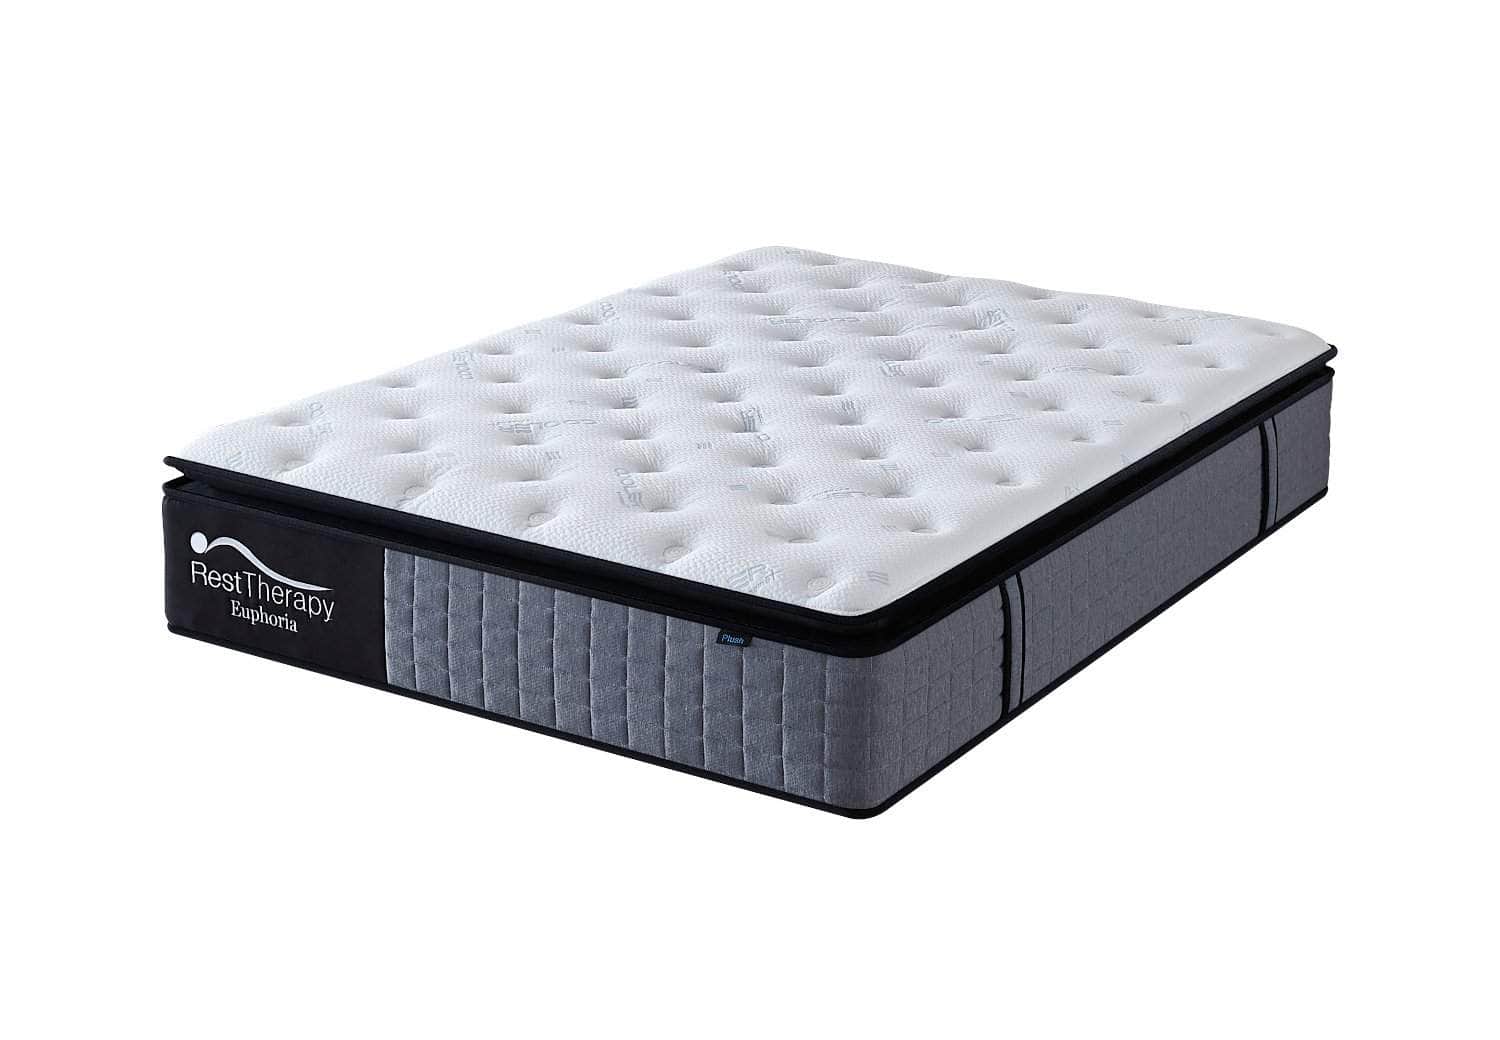 Rest Therapy Mattress Queen 14 Inch Euphoria Cooling Pillow Top Plush Hybrid Pocket Coil Mattress with Cool Gel Memory Foam - Available in 2 Sizes